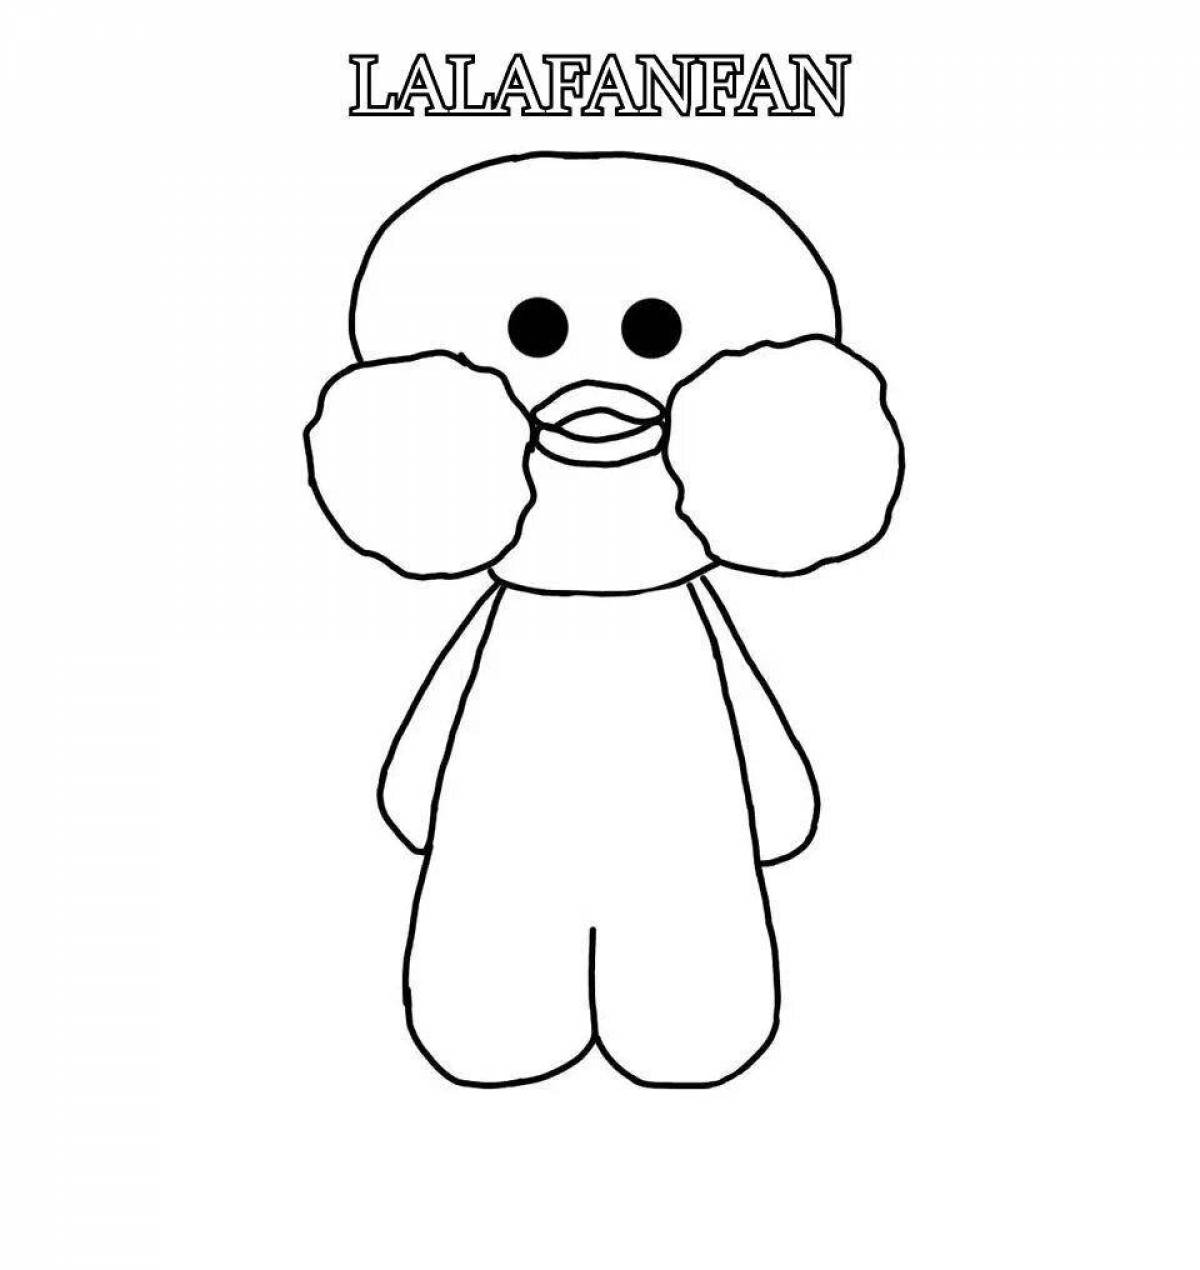 Coloring page adorable dressed duck